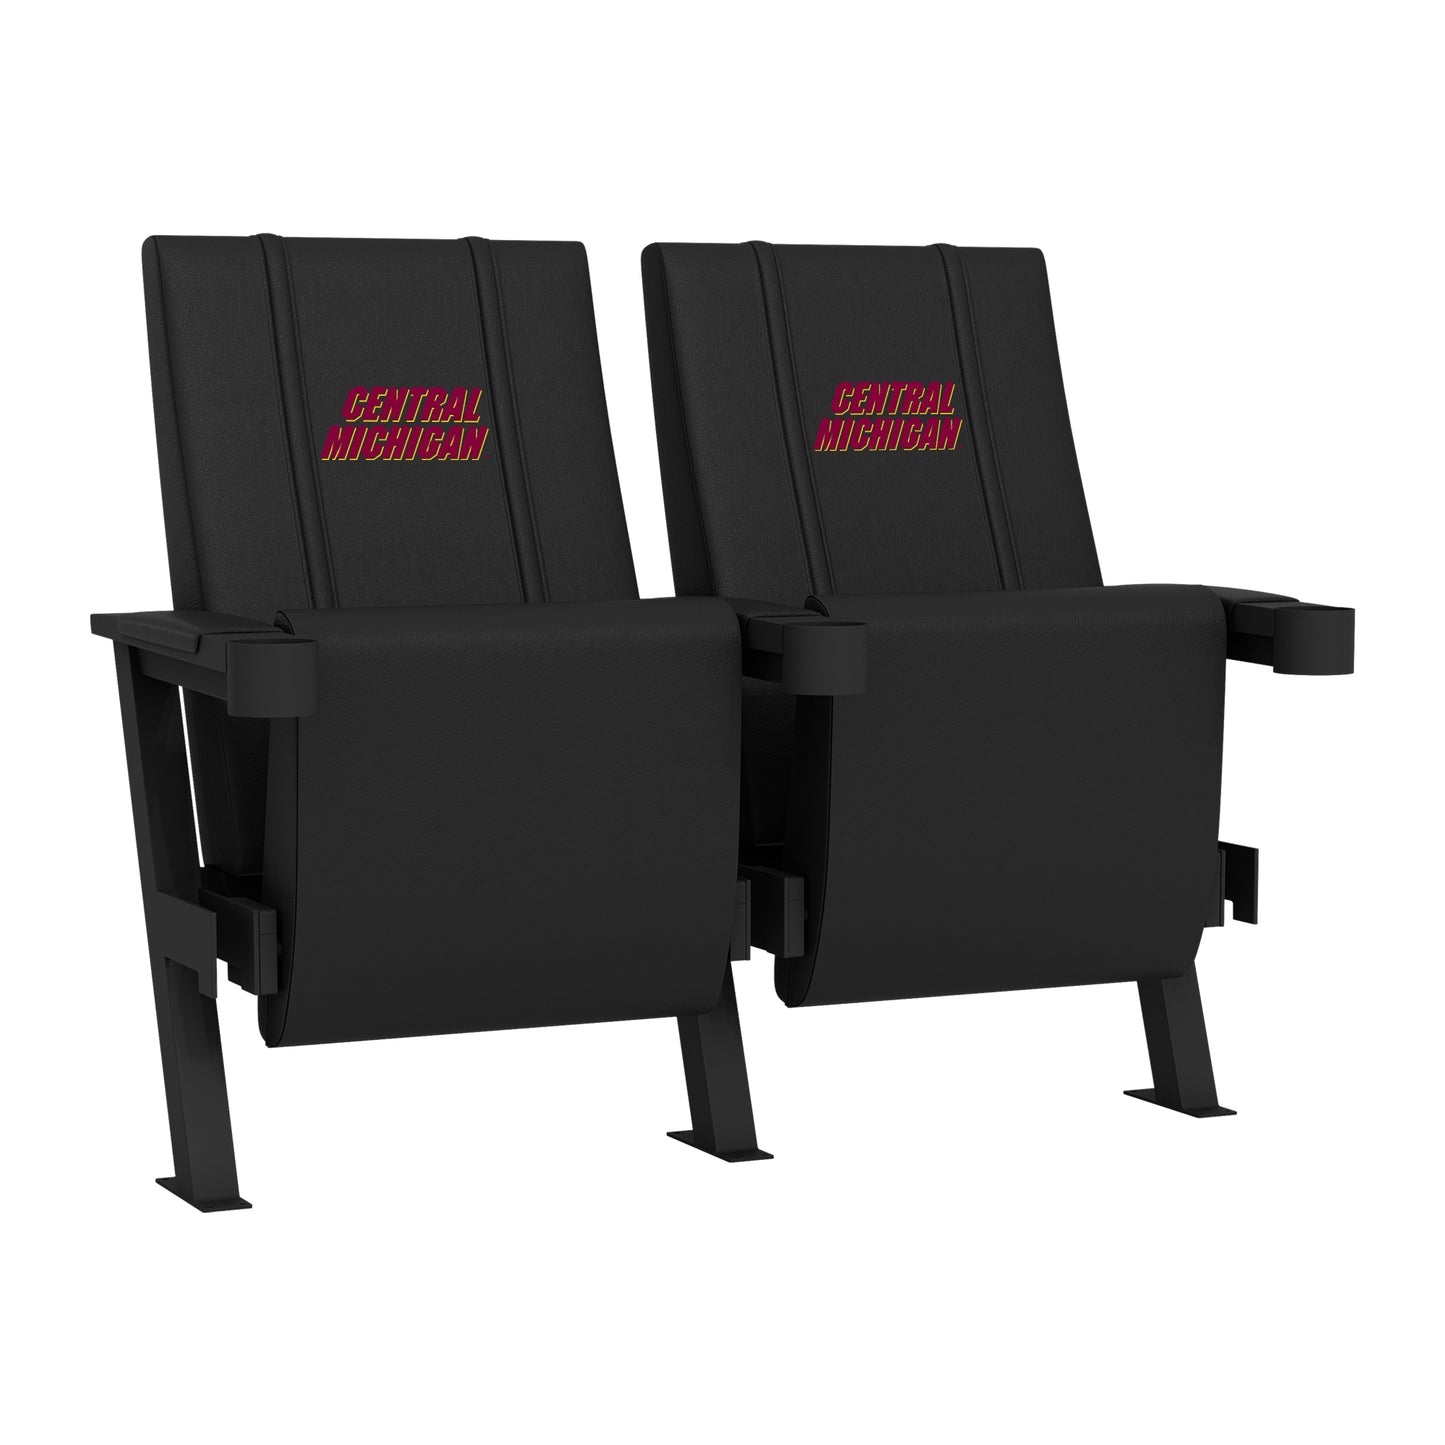 SuiteMax 3.5 VIP Seats with Central Michigan Secondary